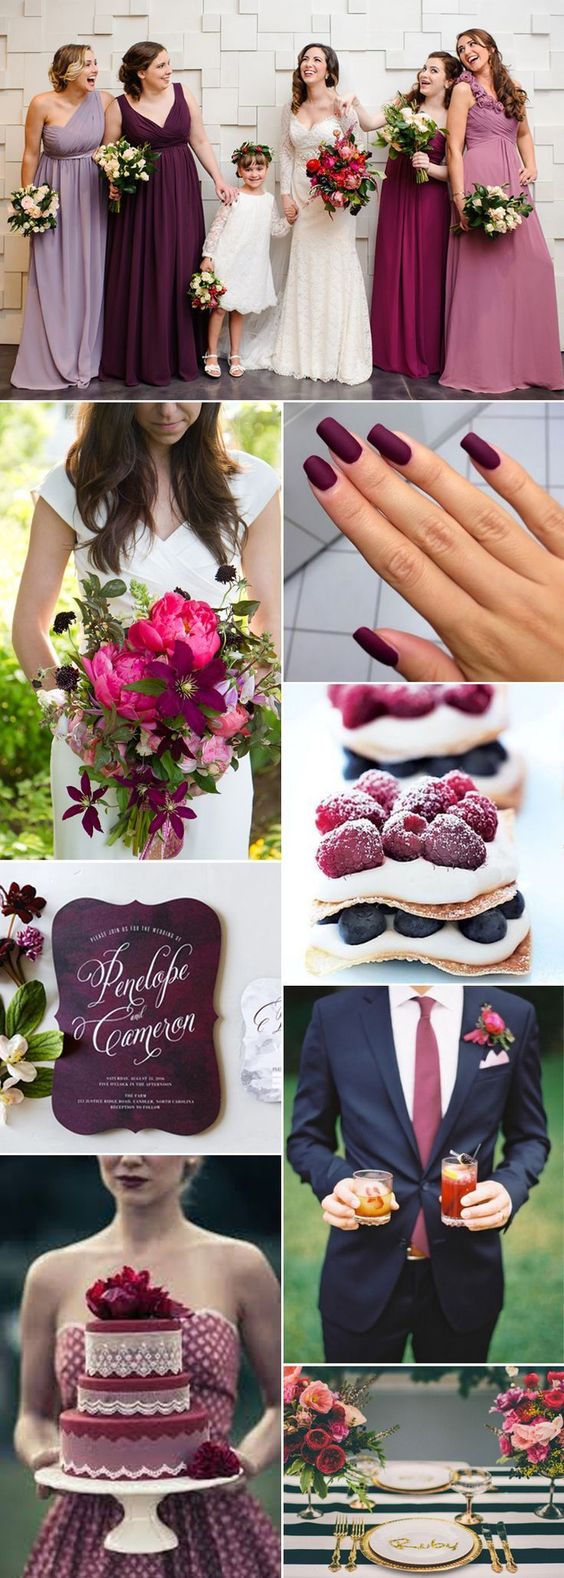 smitten-2 Trend Forecasting: Top 15 Expected Wedding Color Ideas for 2021